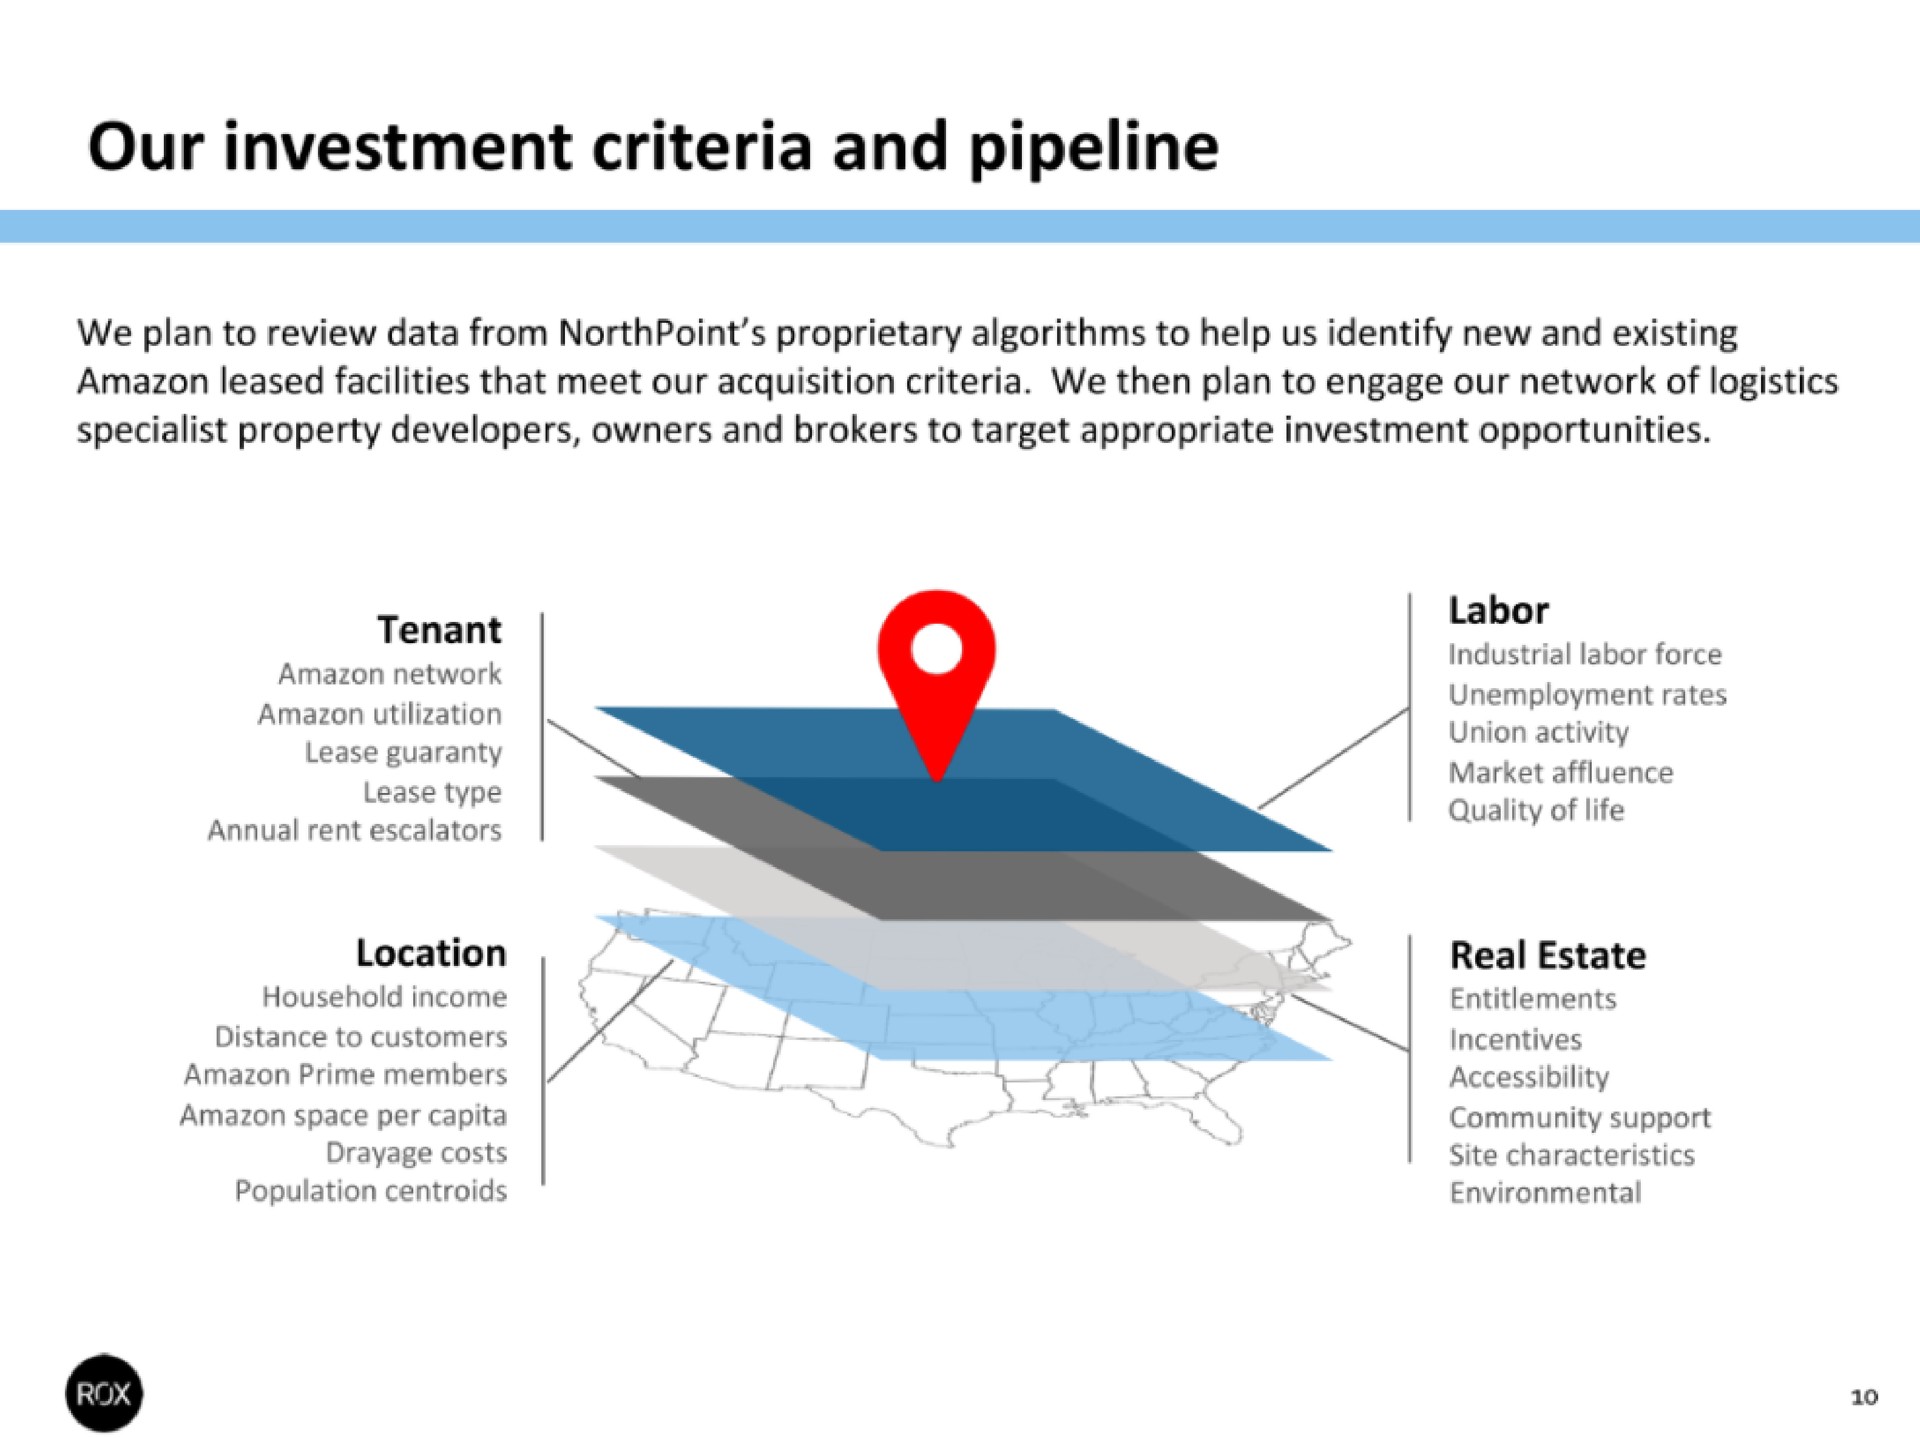 our investment criteria and pipeline we plan to review data from proprietary algorithms to help us identify new and existing leased facilities that meet our acquisition criteria we then plan to engage our network of logistics specialist property developers owners and brokers to target appropriate investment opportunities tenant location labor real estate | ROX Financial